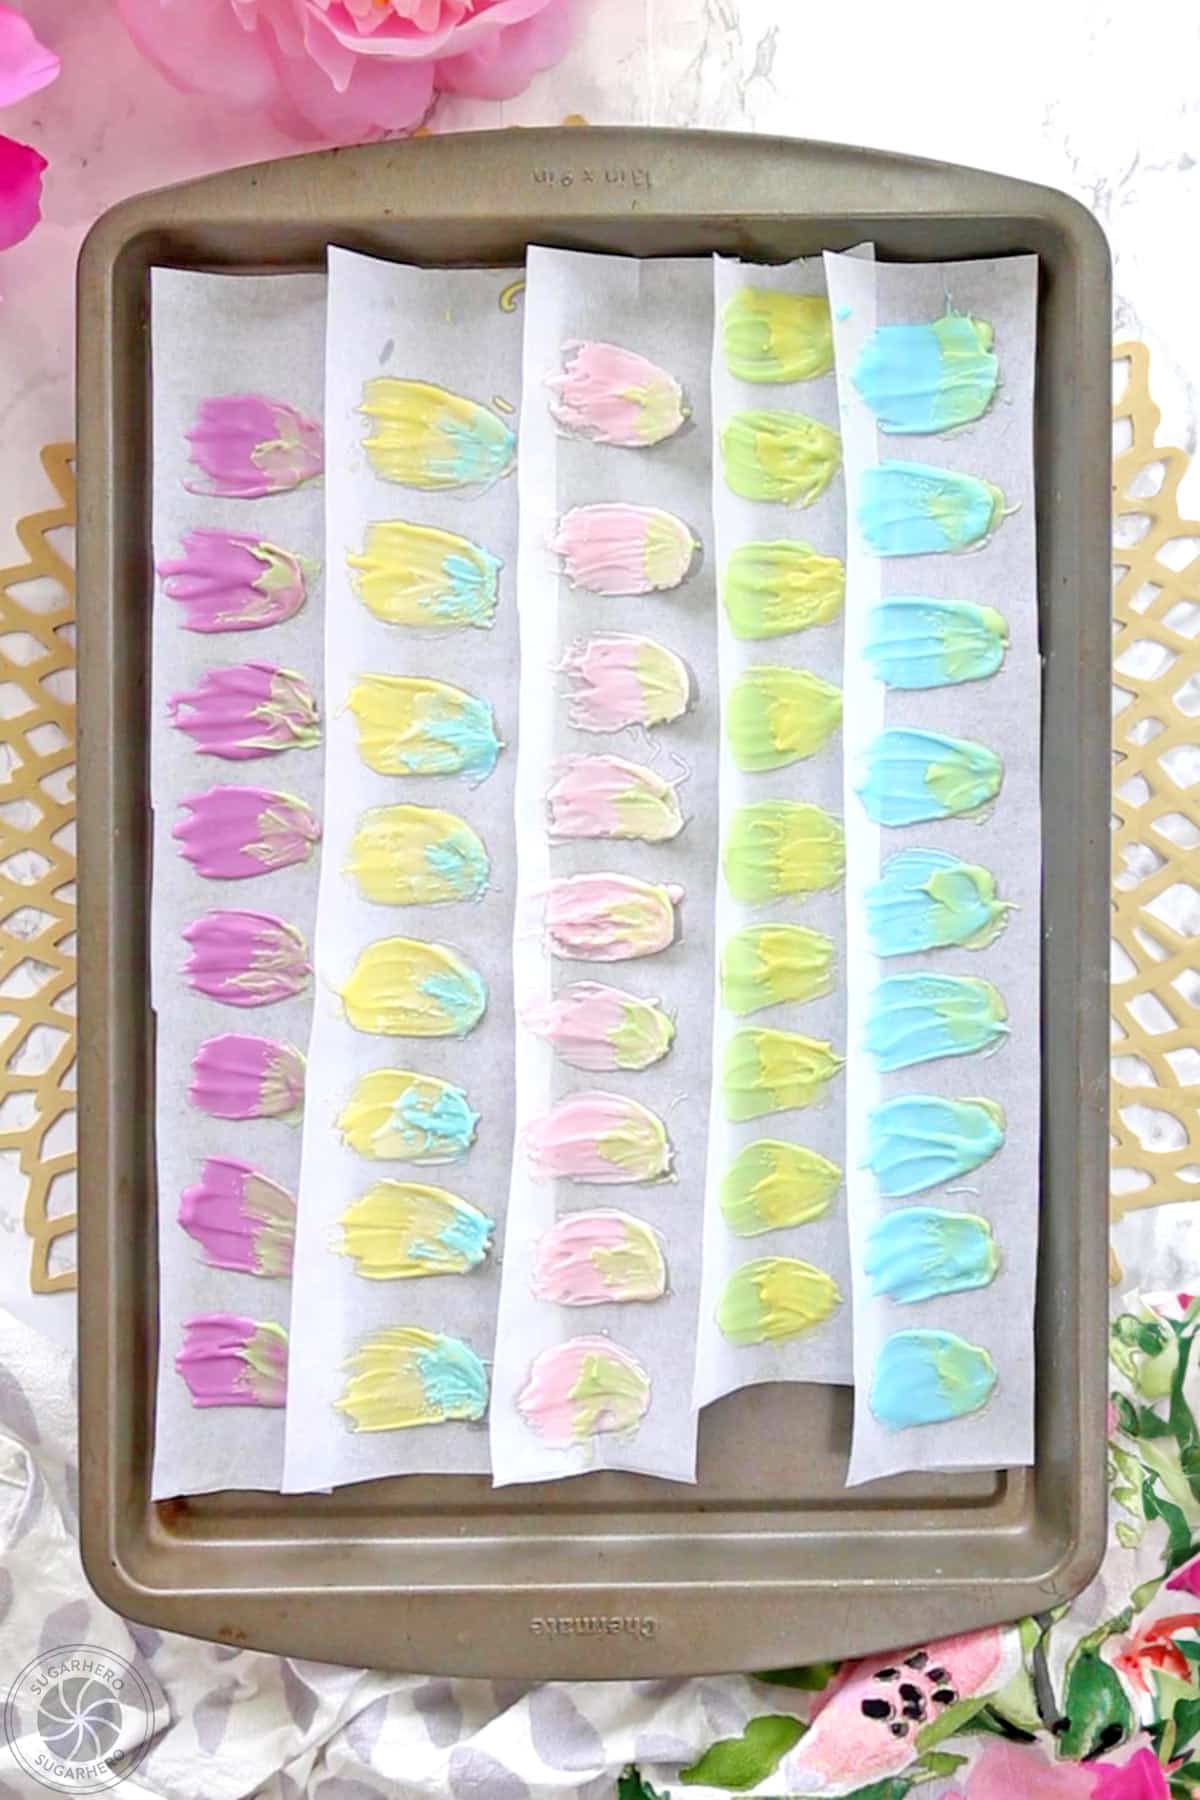 A baking sheet filled with multicolored candy melt petals.